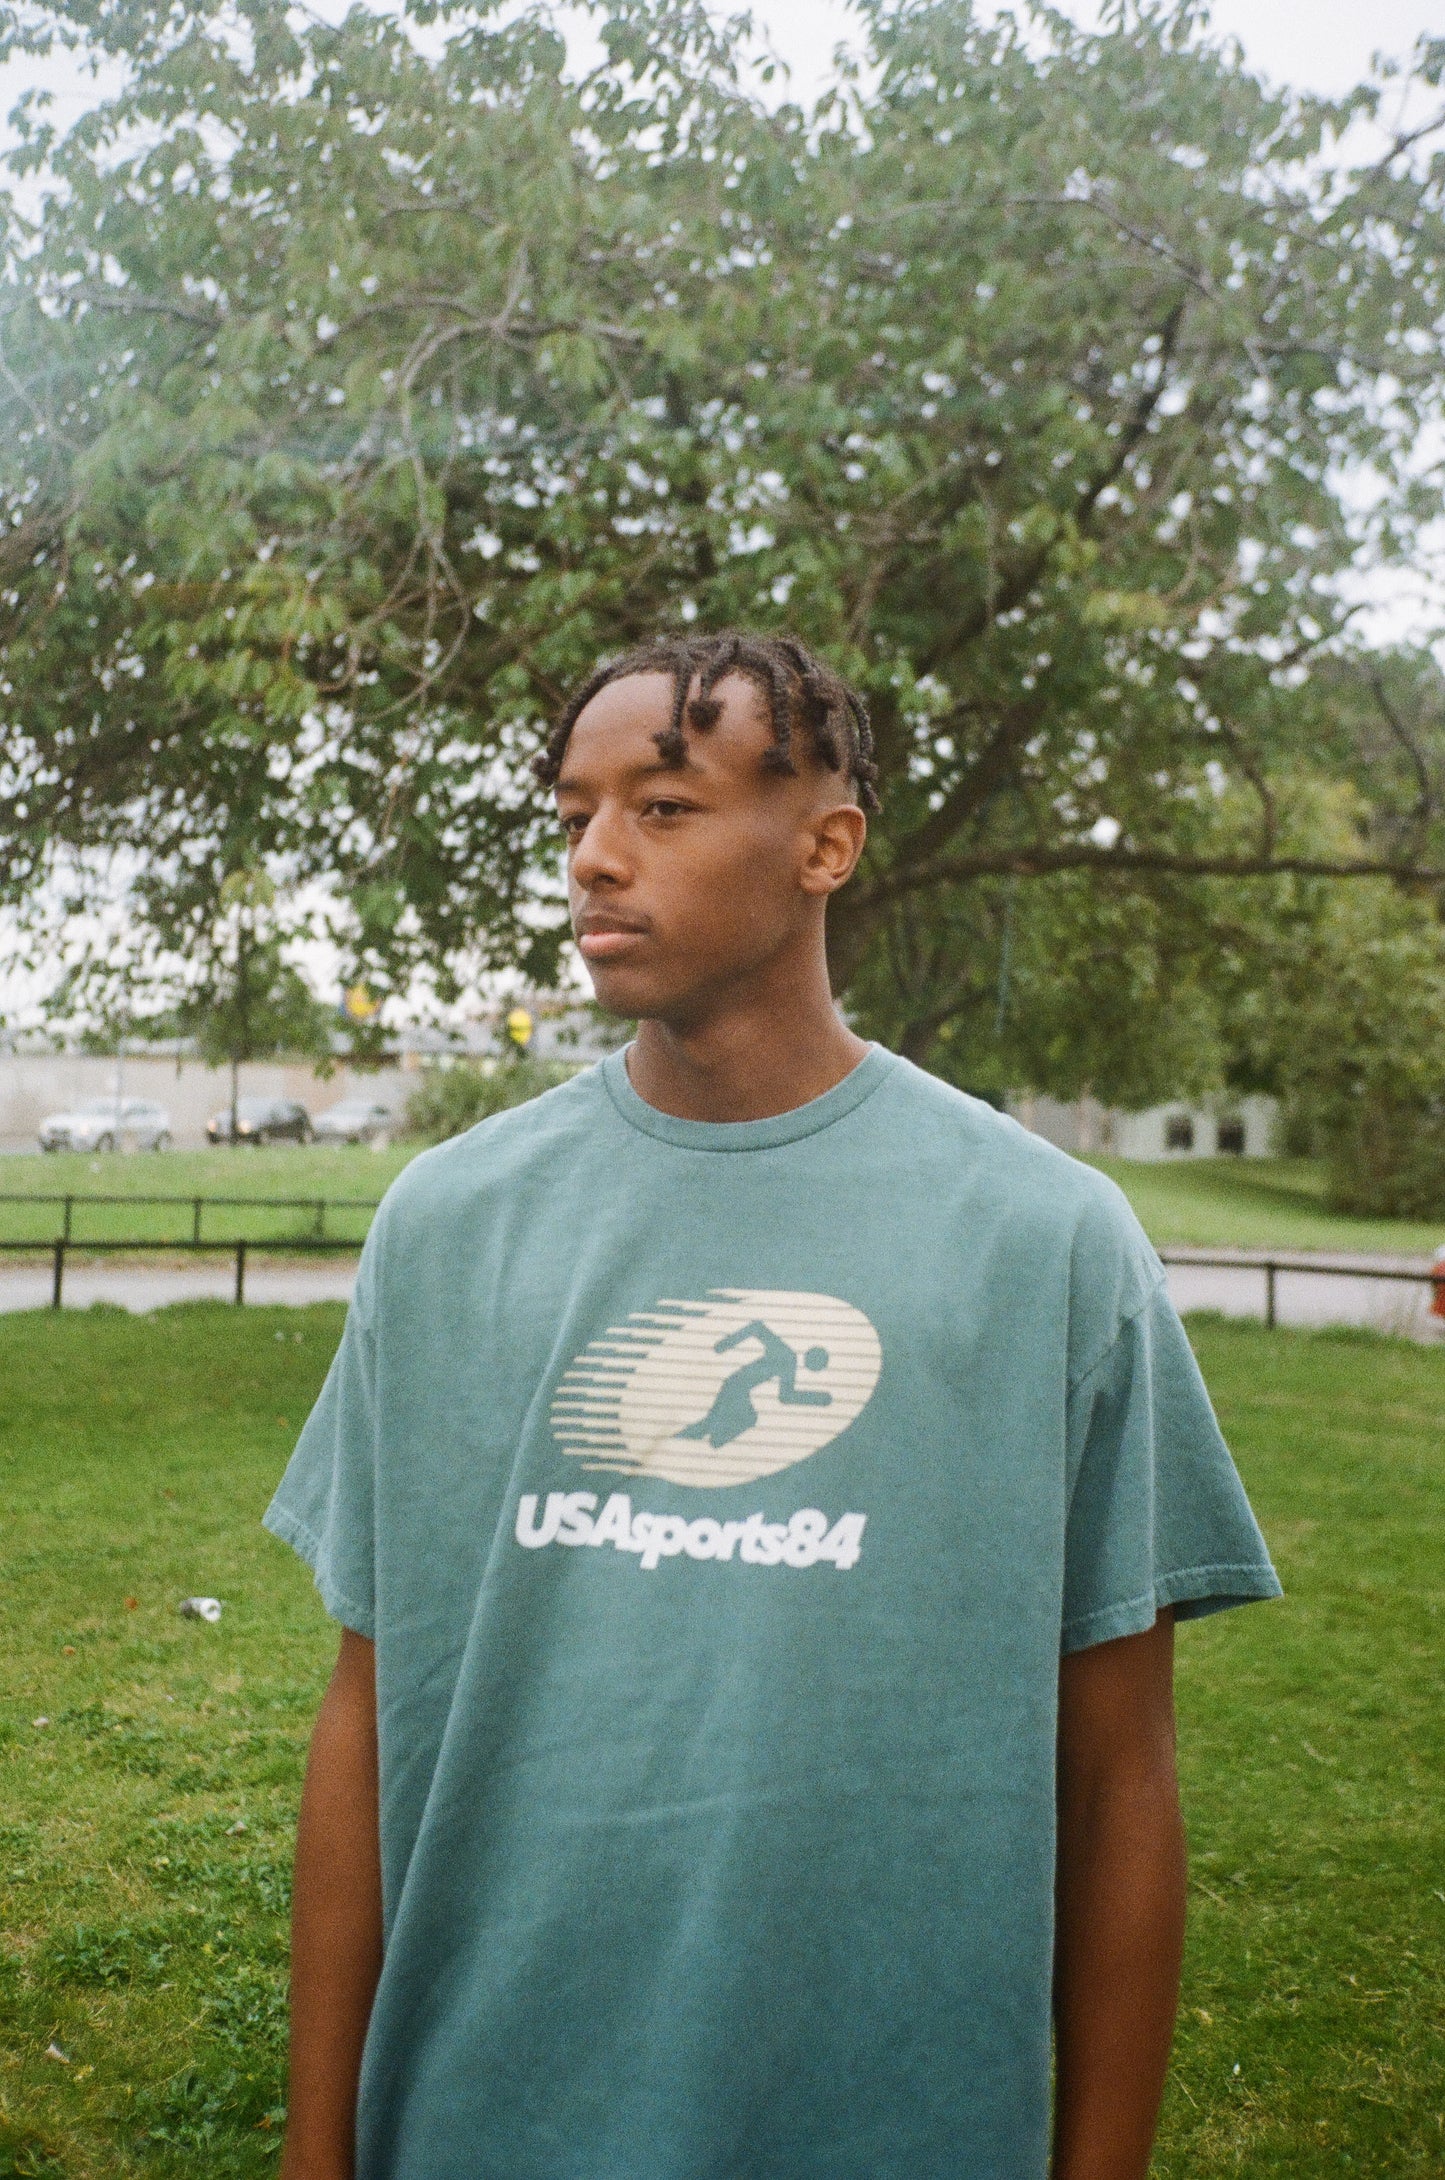 Vice 84 'Sports Runner' Tee - Vintage Washed Green